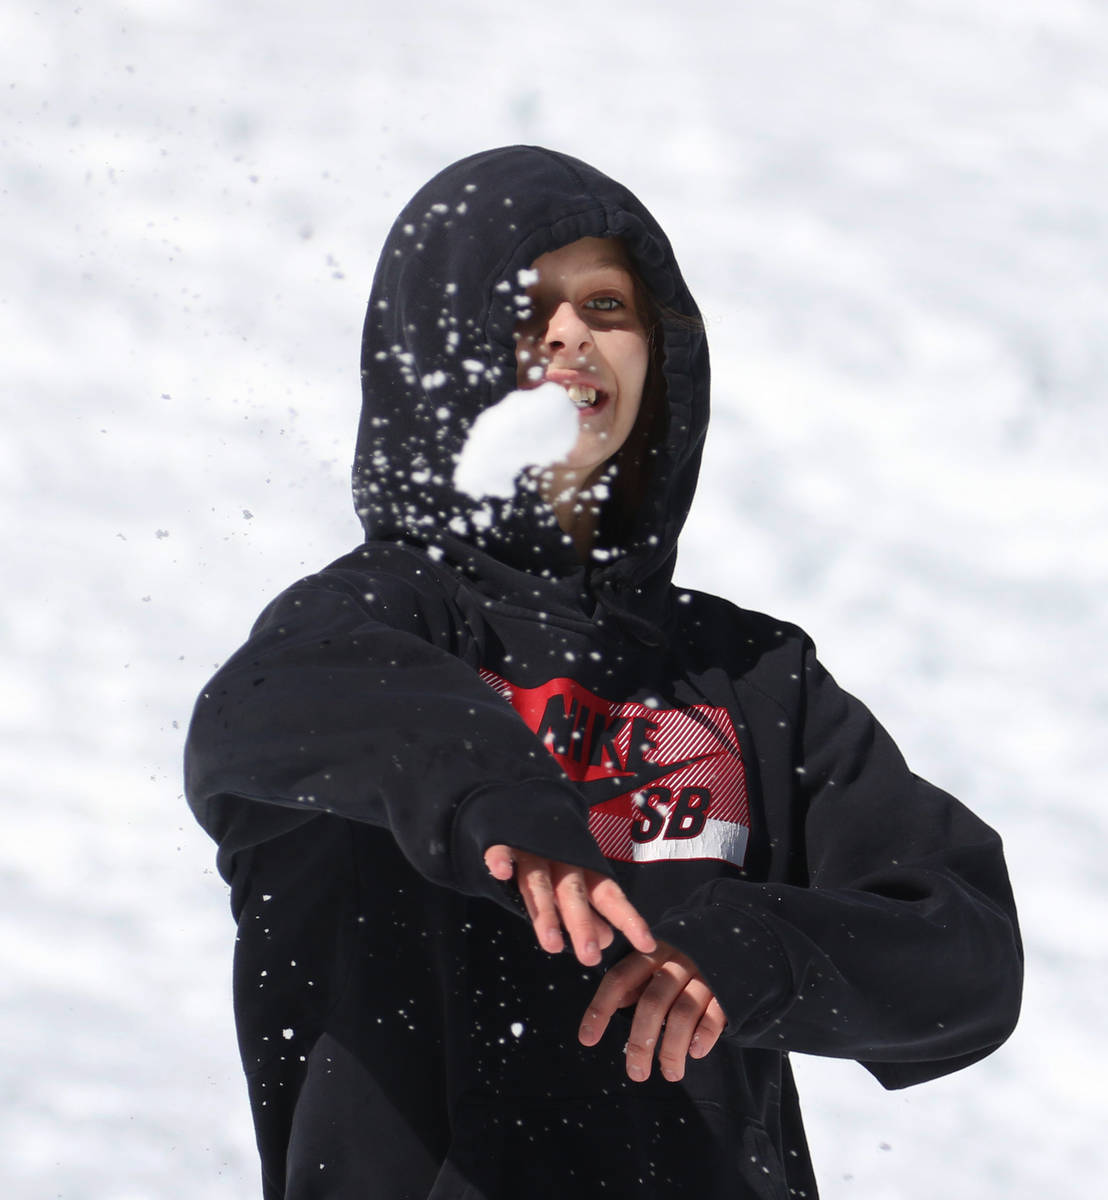 Chloe Solano, 10, of Las Vegas throws a snowball as she plays with her family at Lee Canyon on ...